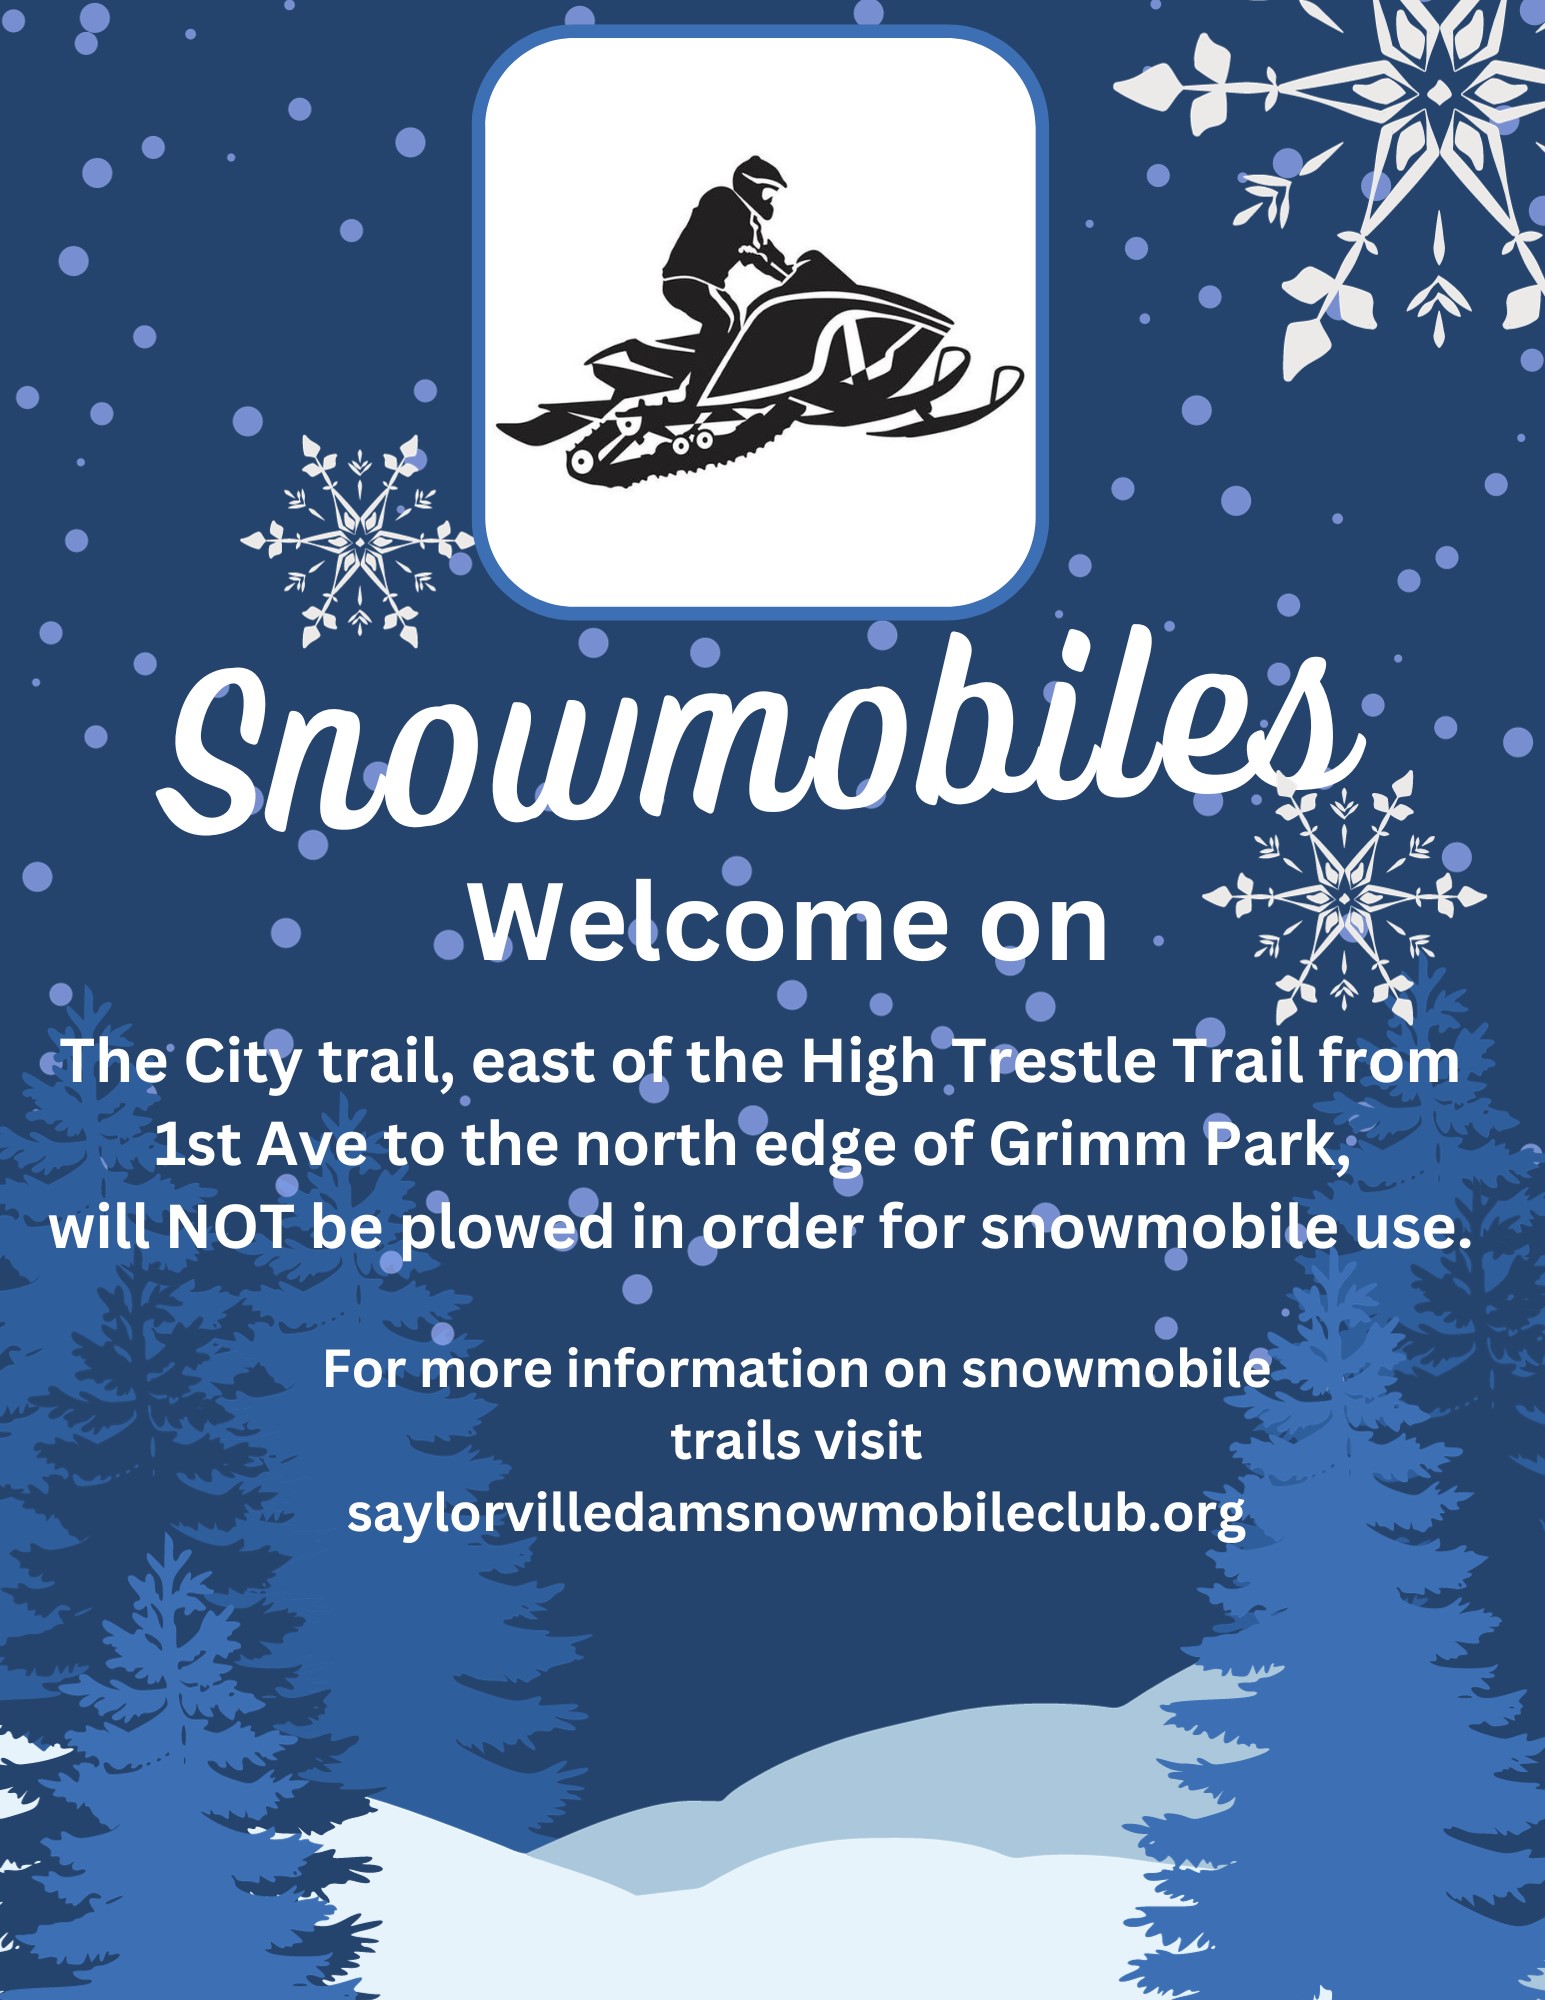 Snowmobiles welcome on City trail 